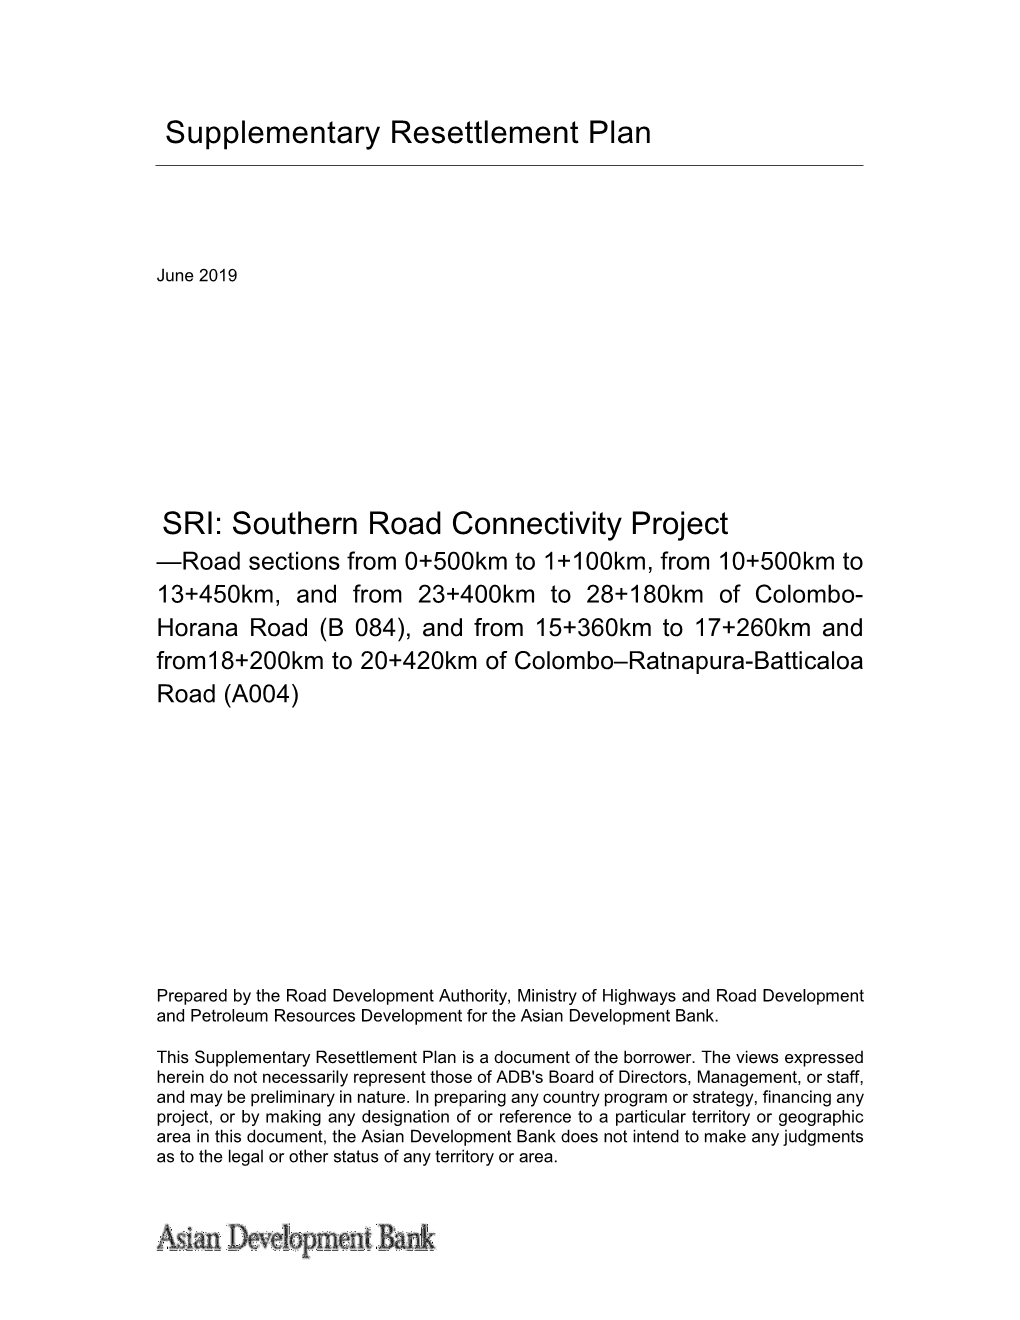 Supplementary Resettlement Plan SRI: Southern Road Connectivity Project